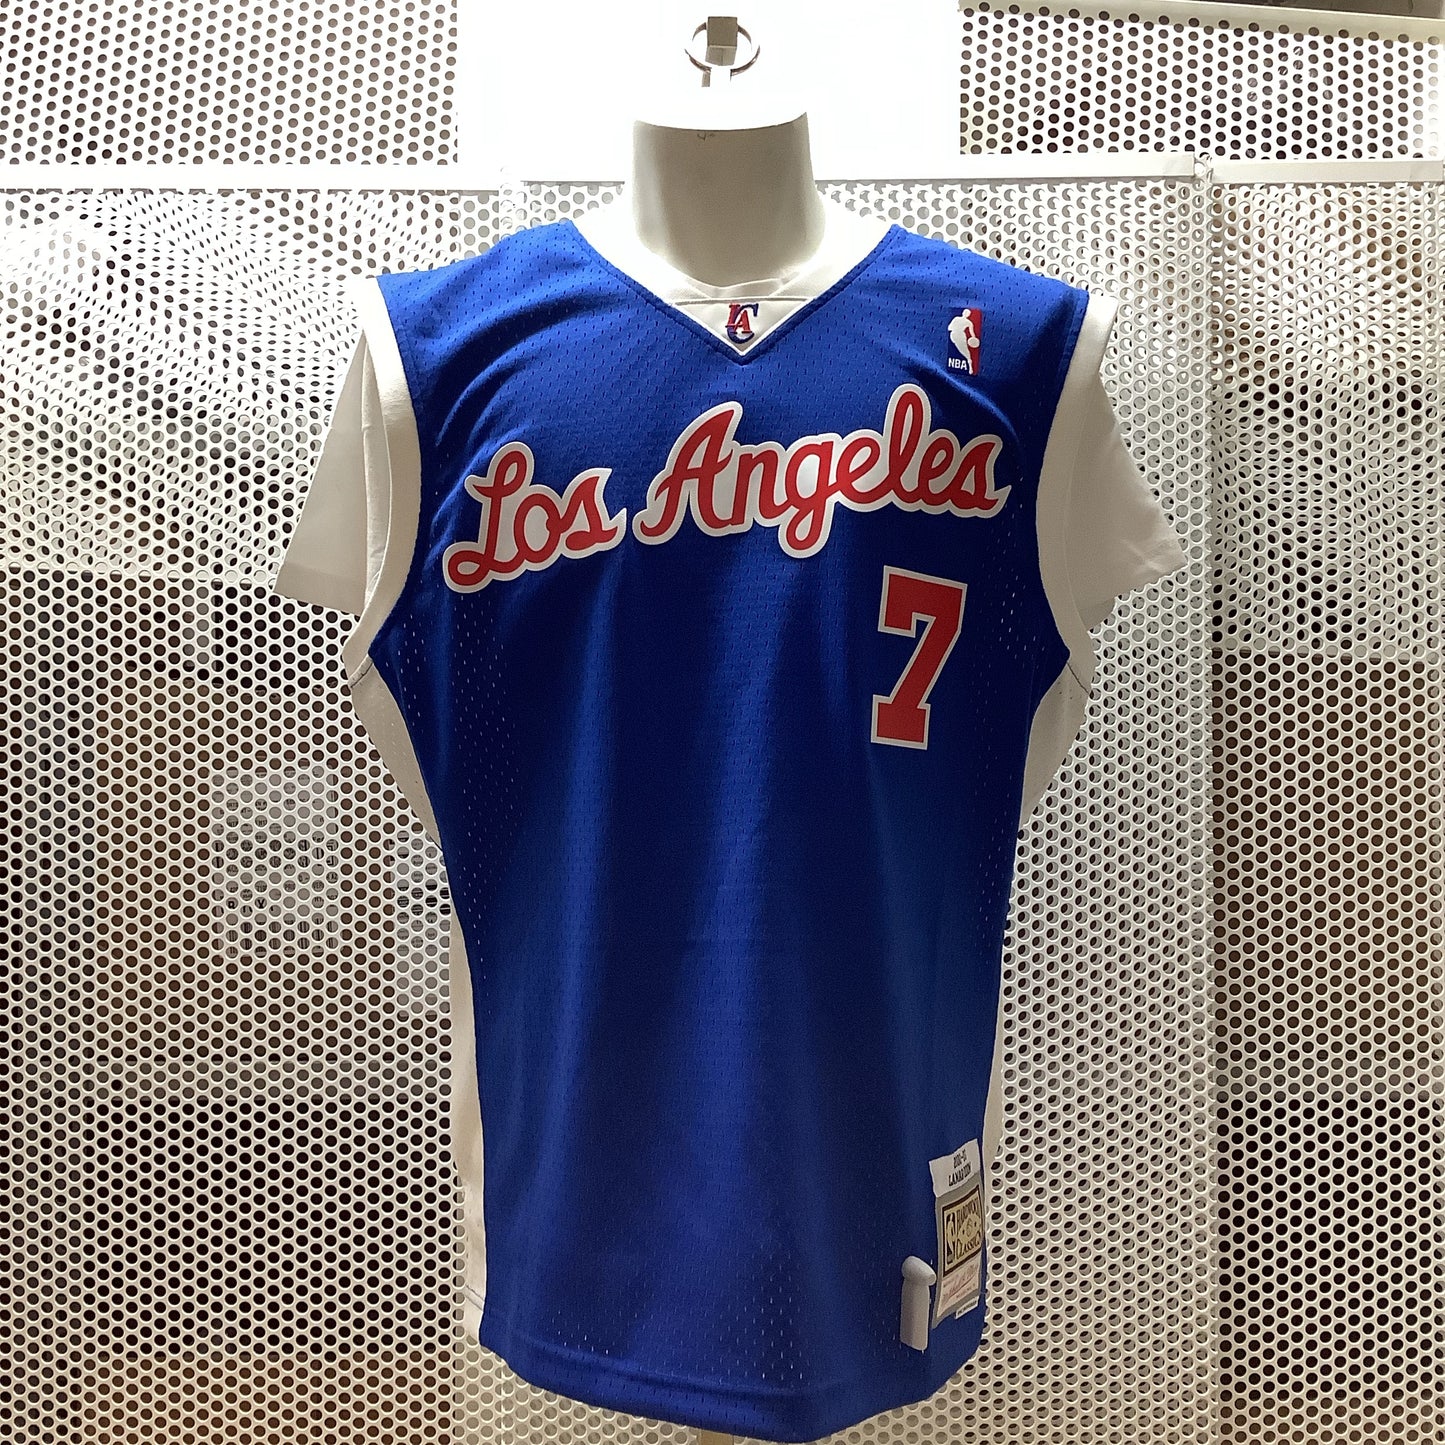 Mitchell & Ness NBA JERSEY LOS ANGELES CLIPPERS #7